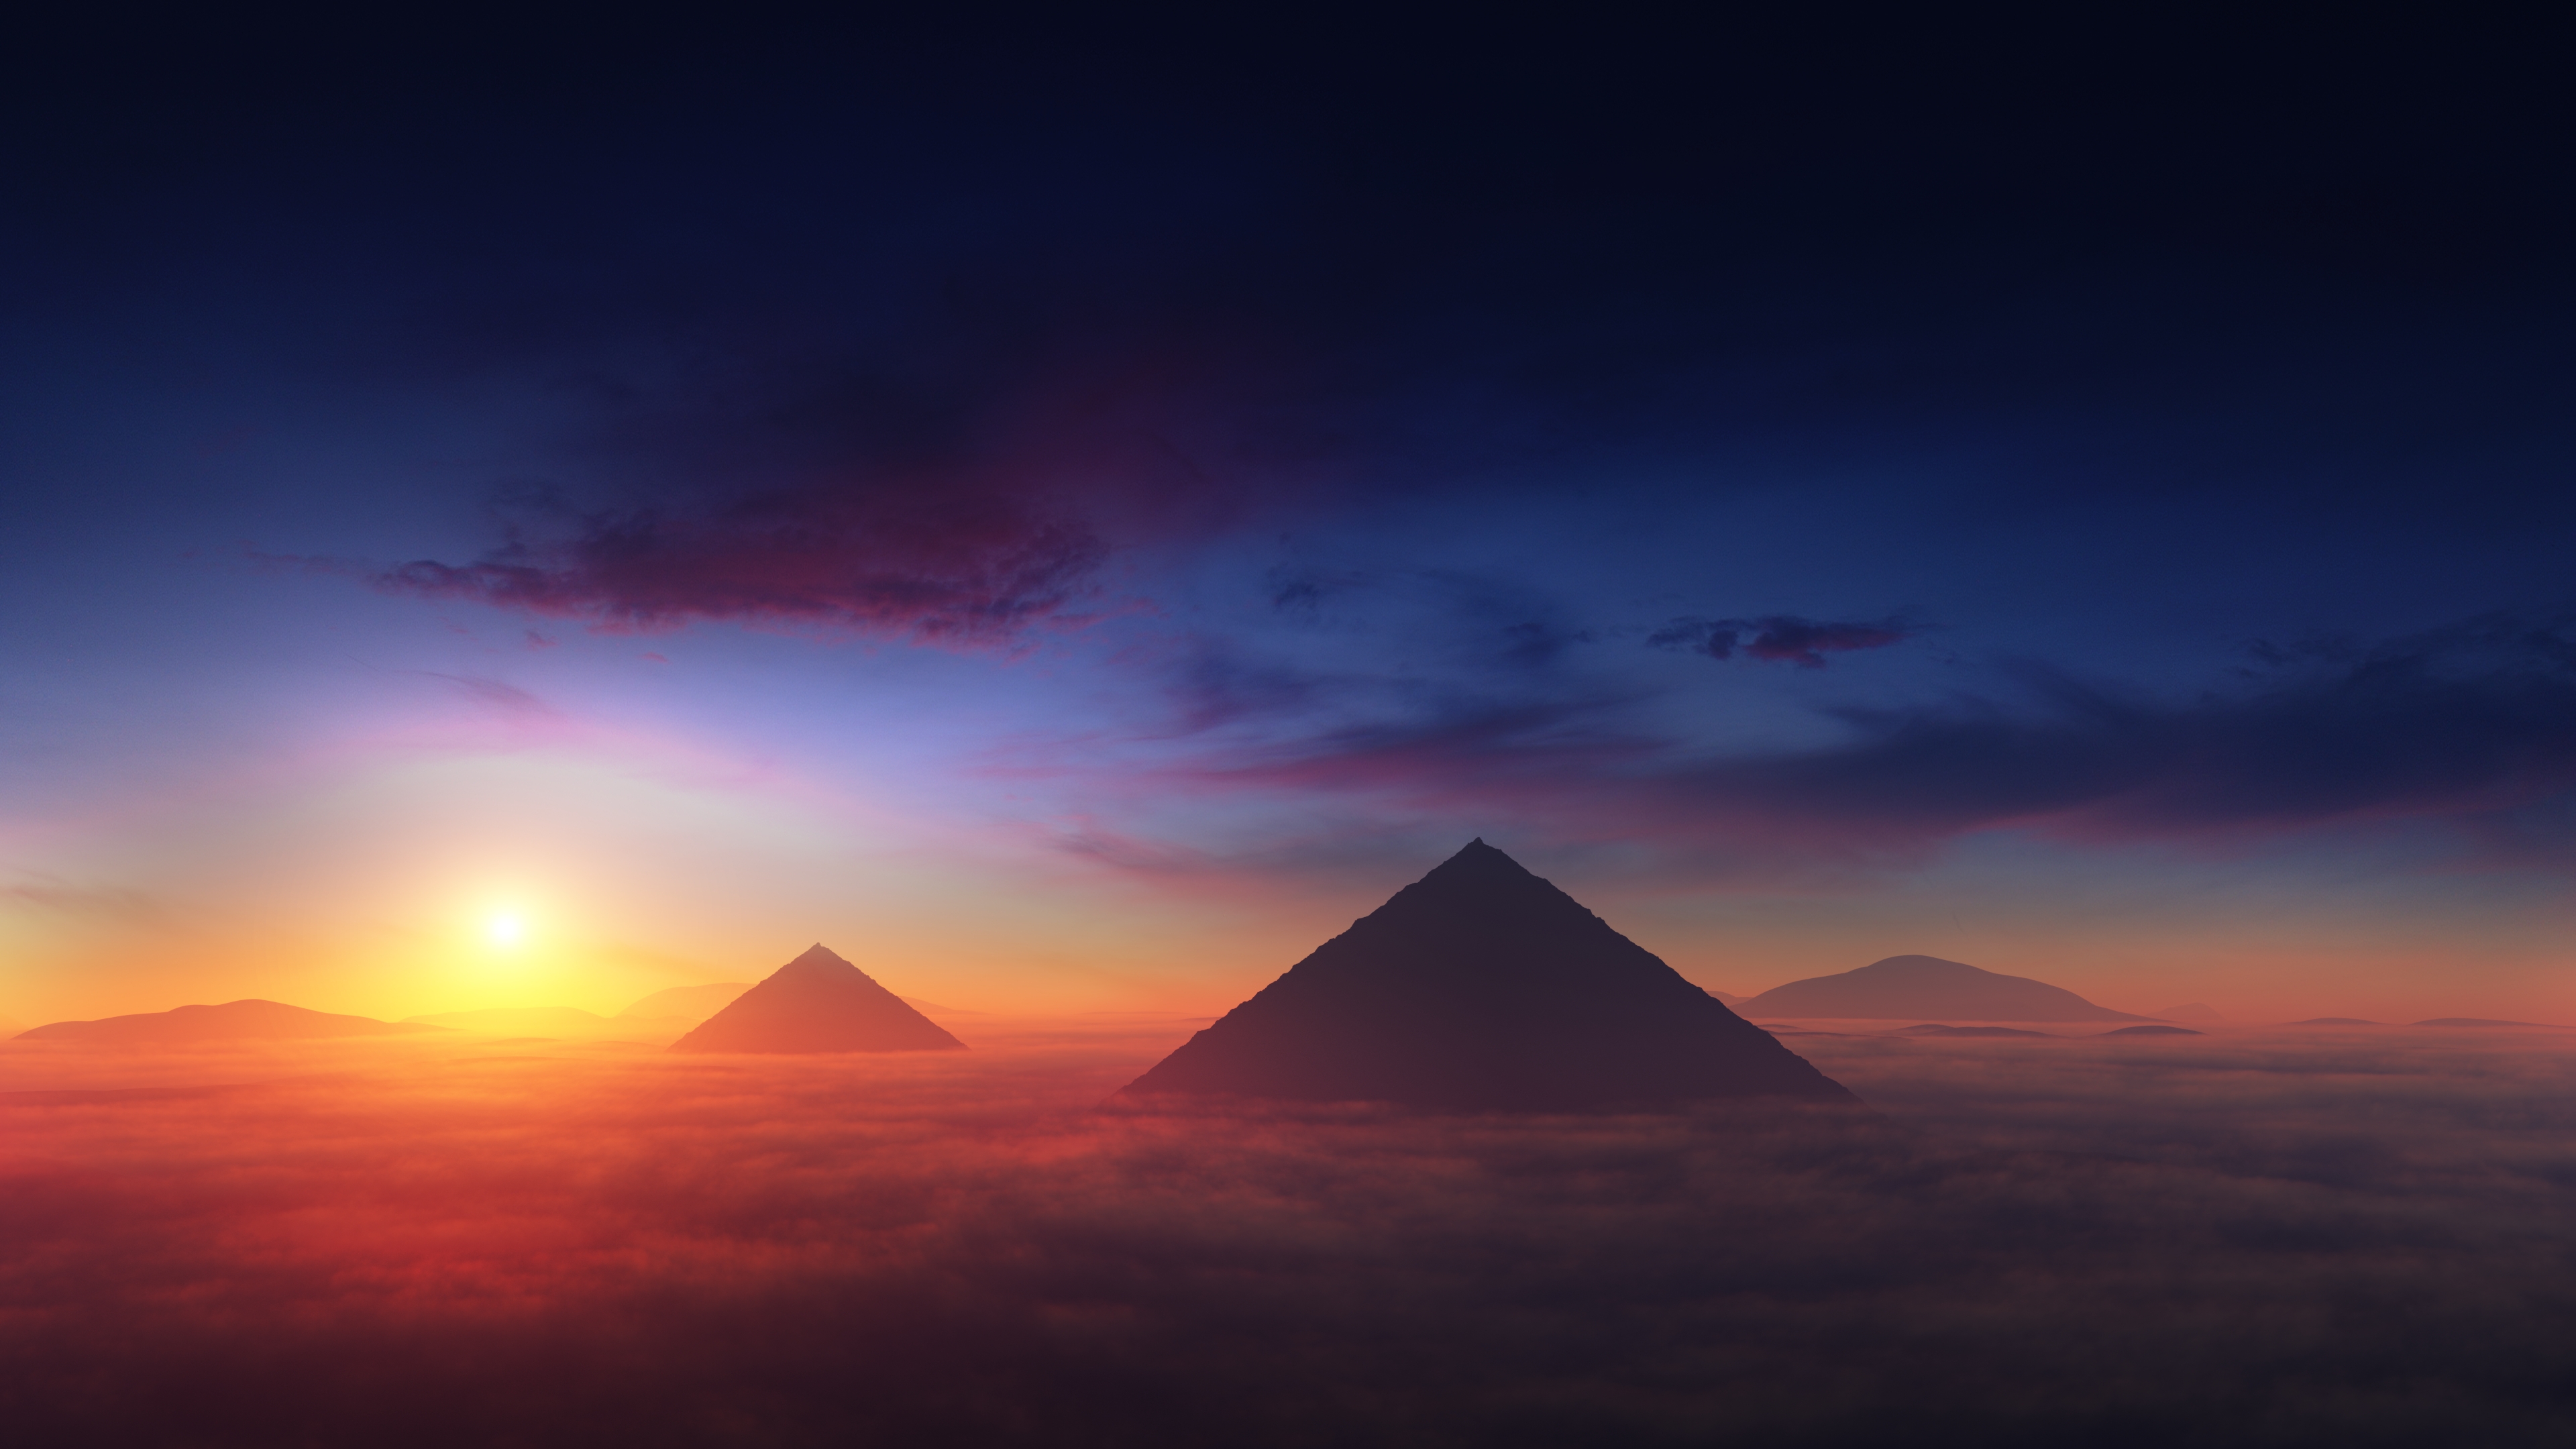 HD wallpaper, The Great Pyramid Of Giza, Horizon, Seven Wonders Of The Ancient World, Egyptian Pyramids, Sunrise, Ancient Architecture, Egypt